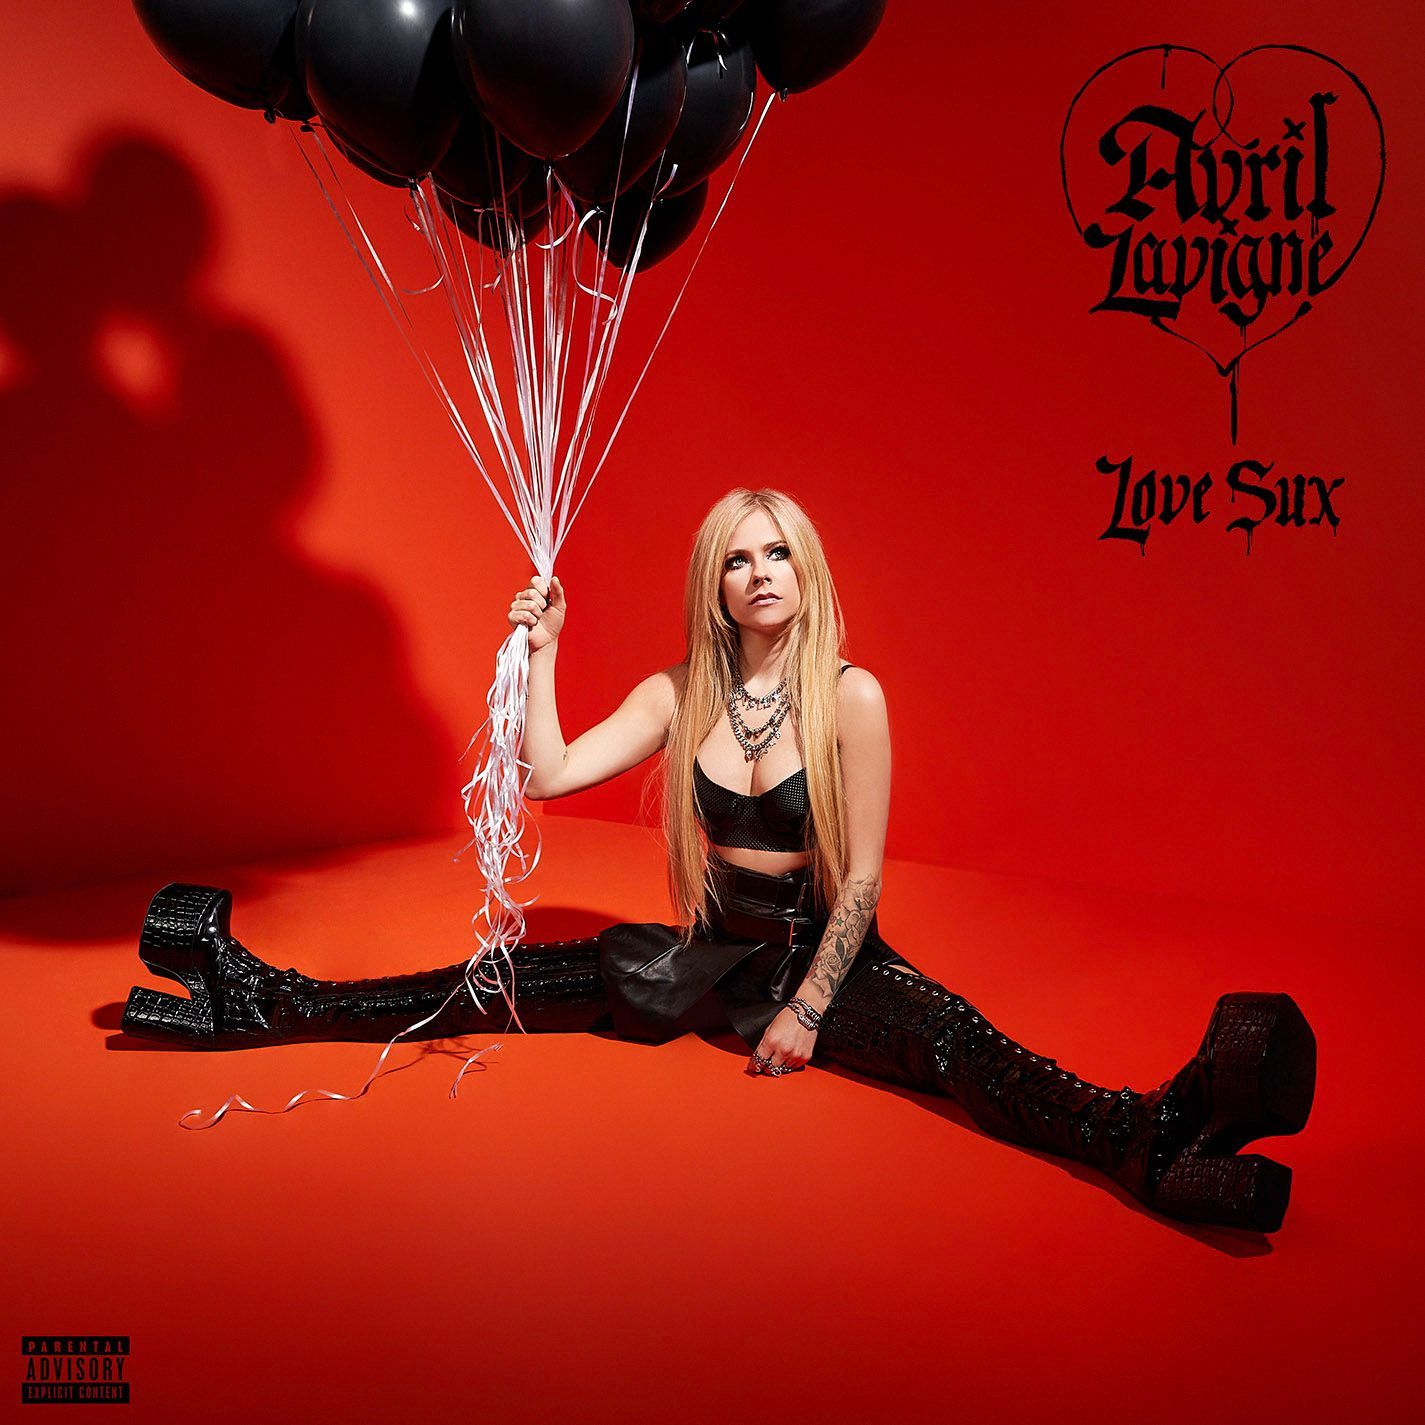 "Love Sux" proves Avril Lavigne is the queen of pop-punk